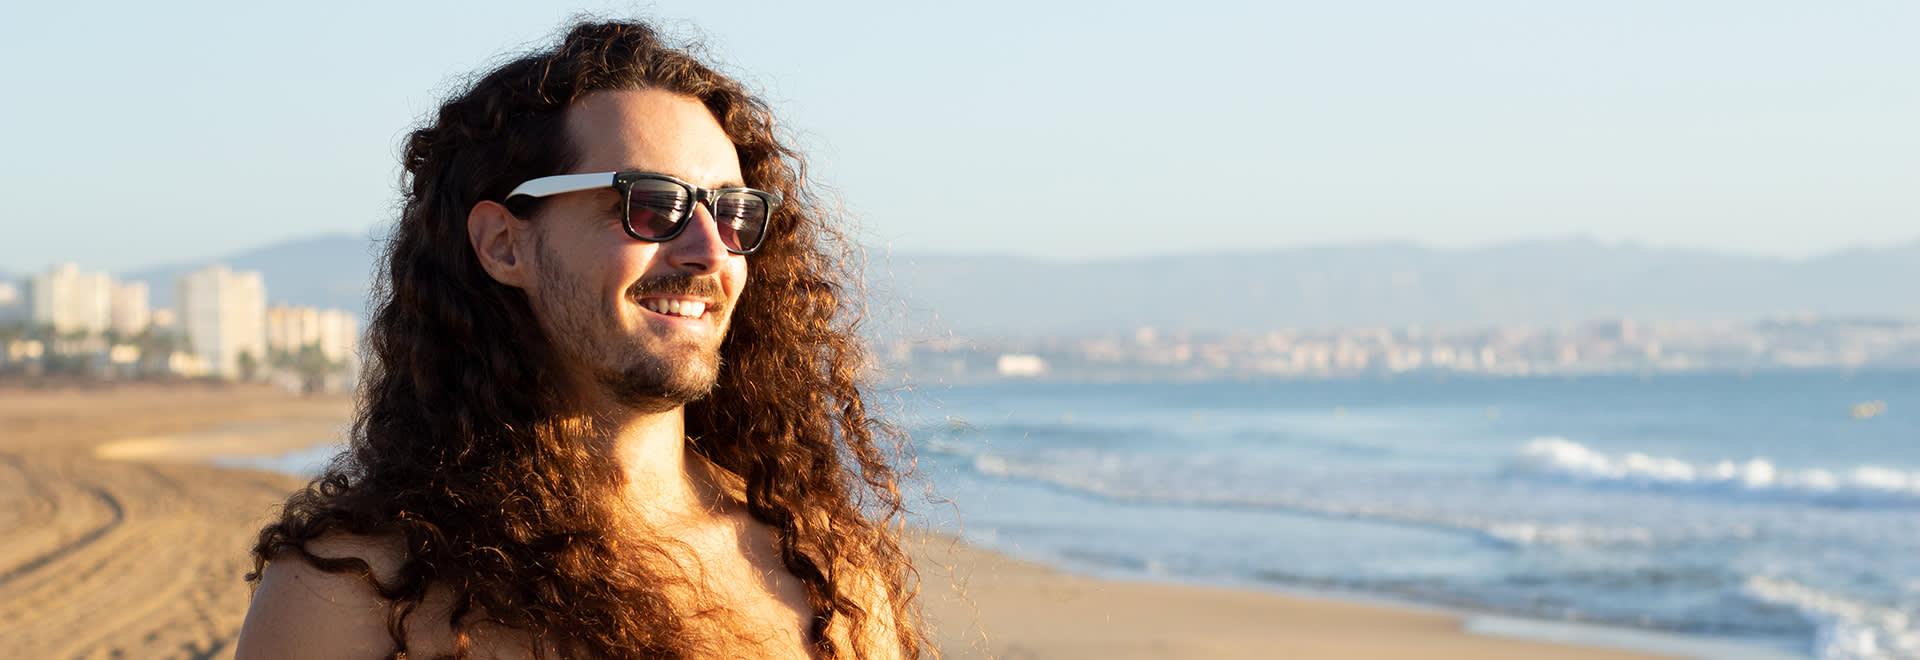 A young man with long curly hair standing on a beach with sunglasses on